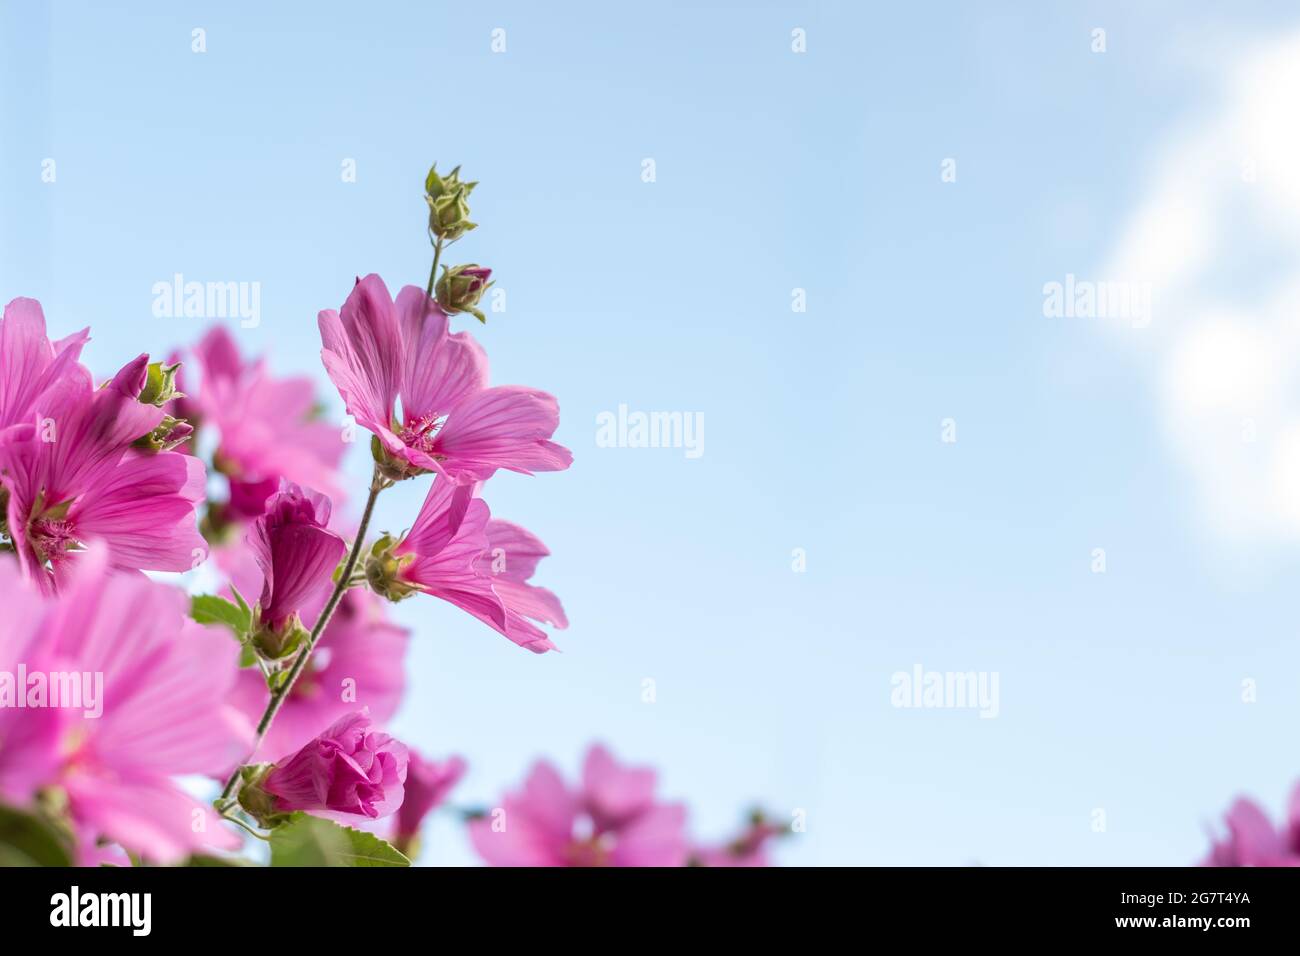 Lavatera clementii Rosea tree mallow or hollyhock flowers against blue sky background copy space for text. Bright pink alcea rosea flower. Stock Photo